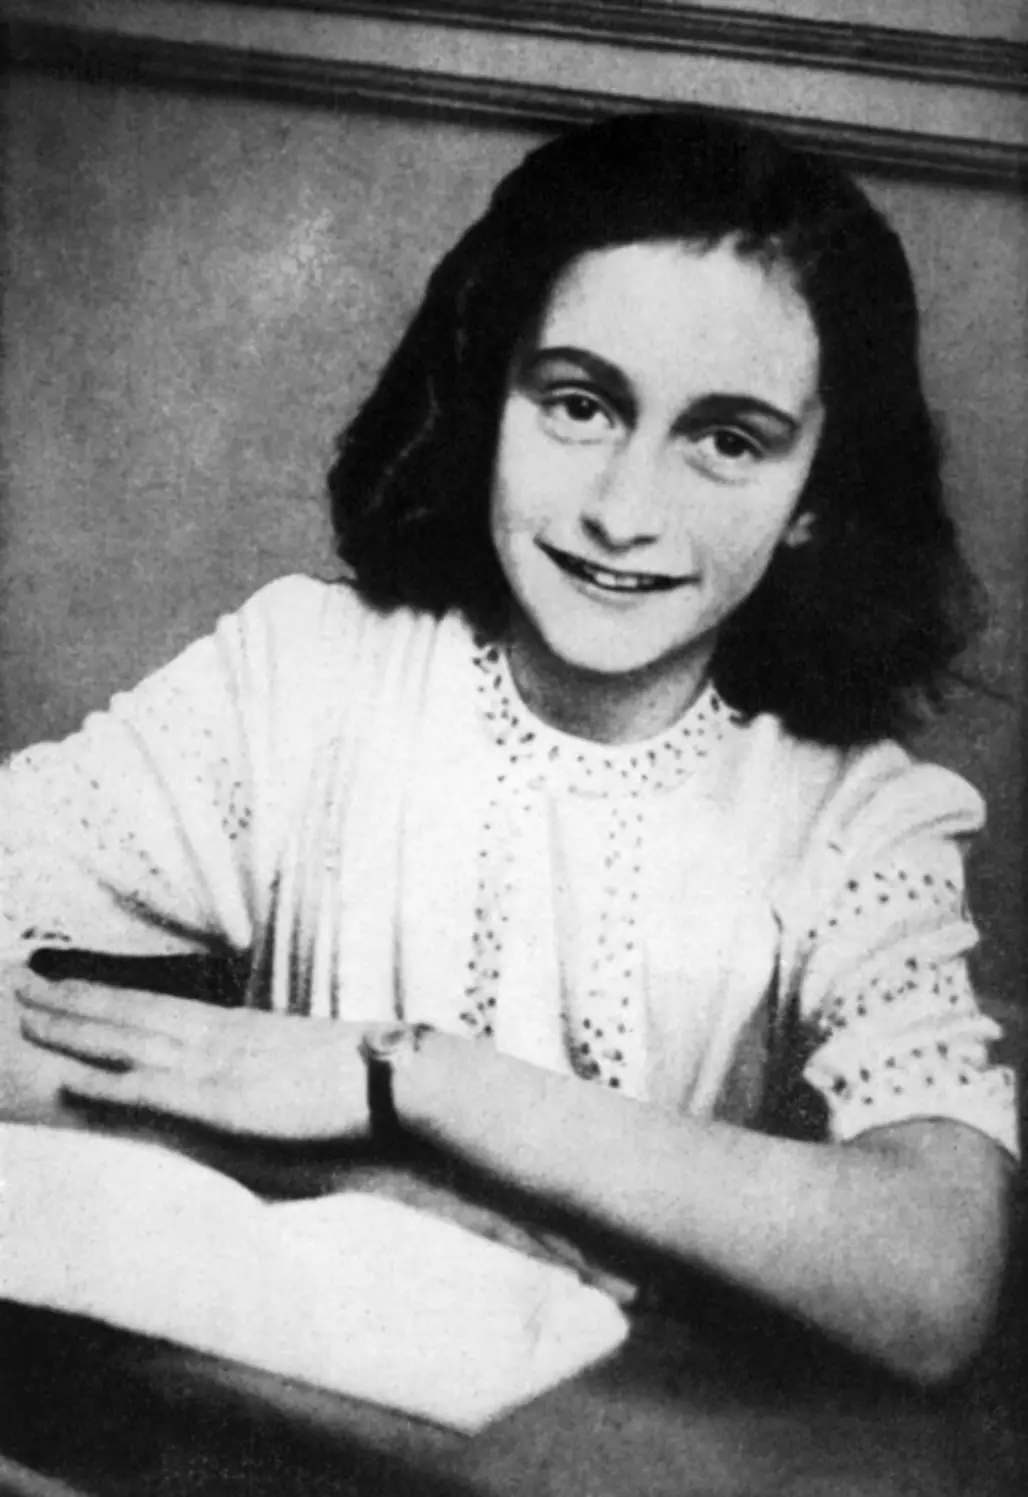 Anne Frank, Author and One of the Most Renowned Jewish Victims of the Holocaust